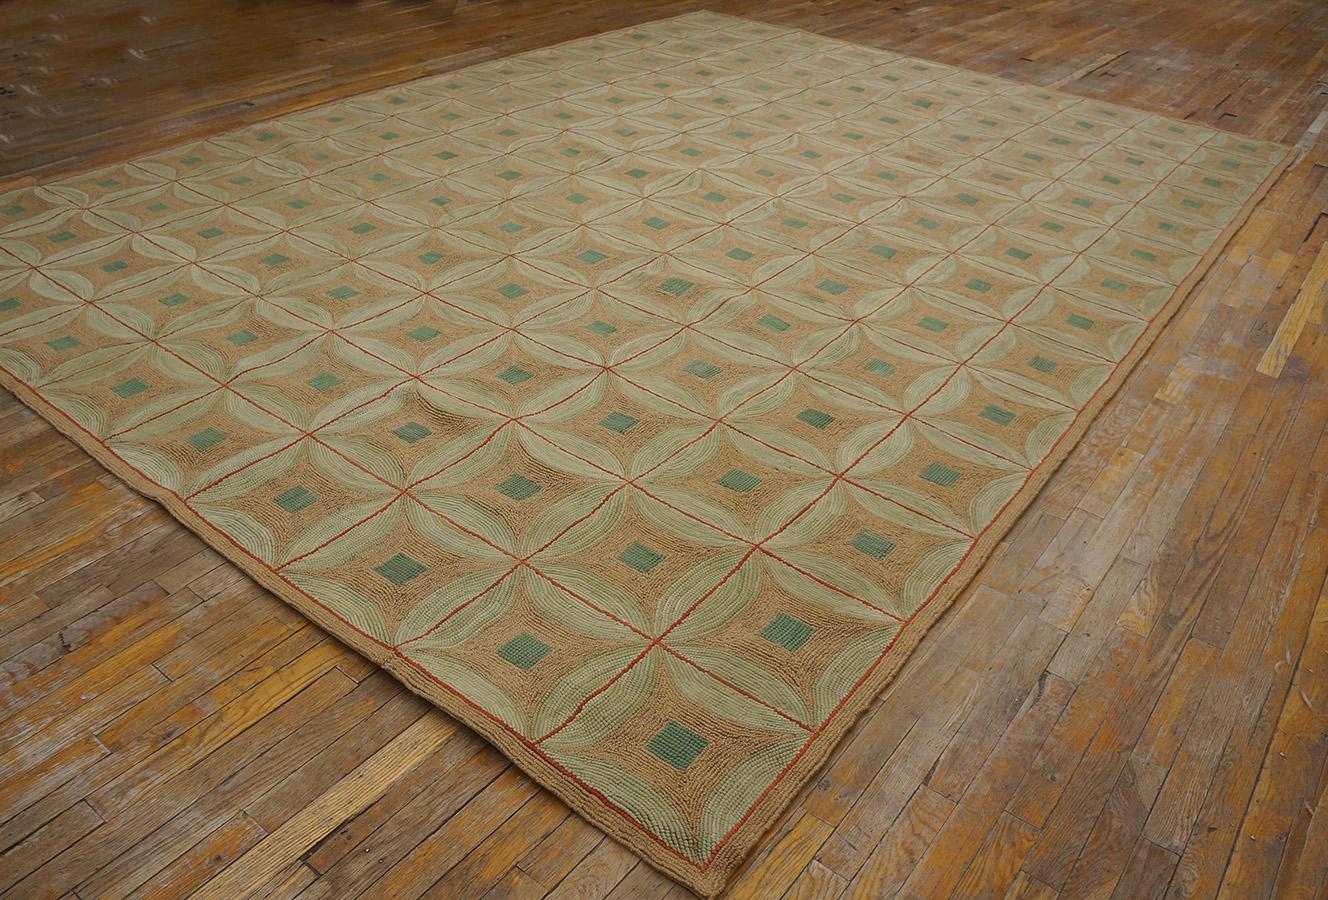 Chinese Contemporary American Hooked Rug (6' x 9' - 182x 274) For Sale